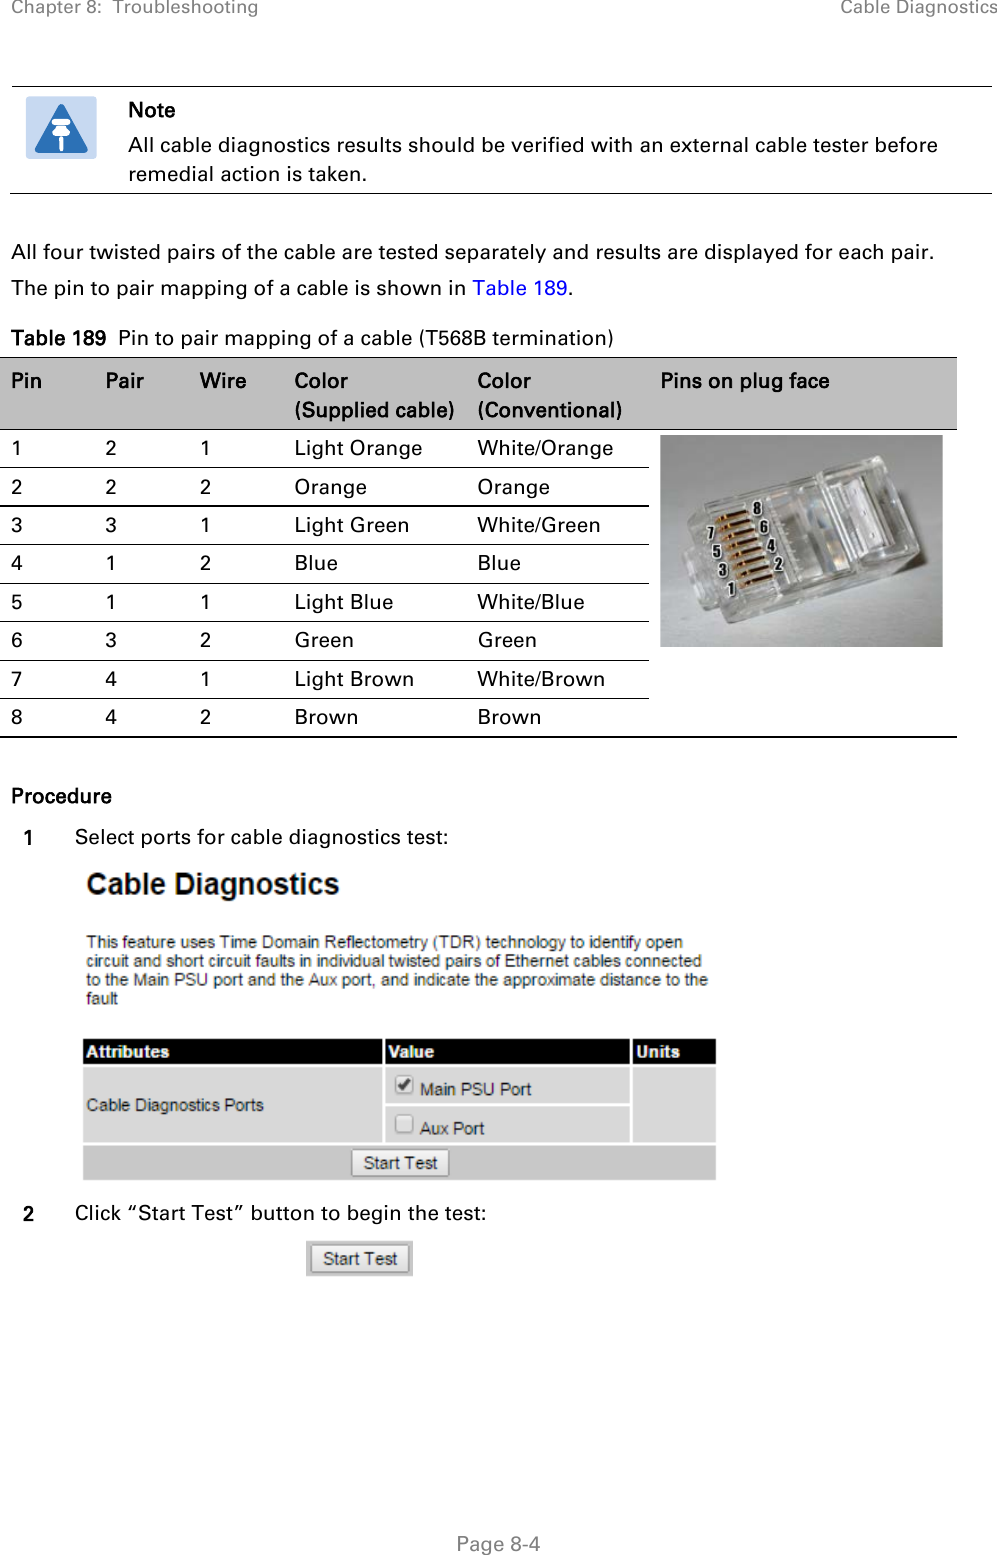 Chapter 8:  Troubleshooting Cable Diagnostics   Note All cable diagnostics results should be verified with an external cable tester before remedial action is taken.  All four twisted pairs of the cable are tested separately and results are displayed for each pair. The pin to pair mapping of a cable is shown in Table 189.  Table 189  Pin to pair mapping of a cable (T568B termination) Pin Pair Wire Color   (Supplied cable) Color (Conventional) Pins on plug face 1  2  1  Light Orange White/Orange   2  2  2  Orange Orange 3  3  1  Light Green White/Green 4  1  2  Blue Blue 5  1  1  Light Blue White/Blue 6  3  2  Green Green 7  4  1  Light Brown White/Brown 8  4  2  Brown Brown  Procedure 1 Select ports for cable diagnostics test:   2 Click “Start Test” button to begin the test:                                             Page 8-4 